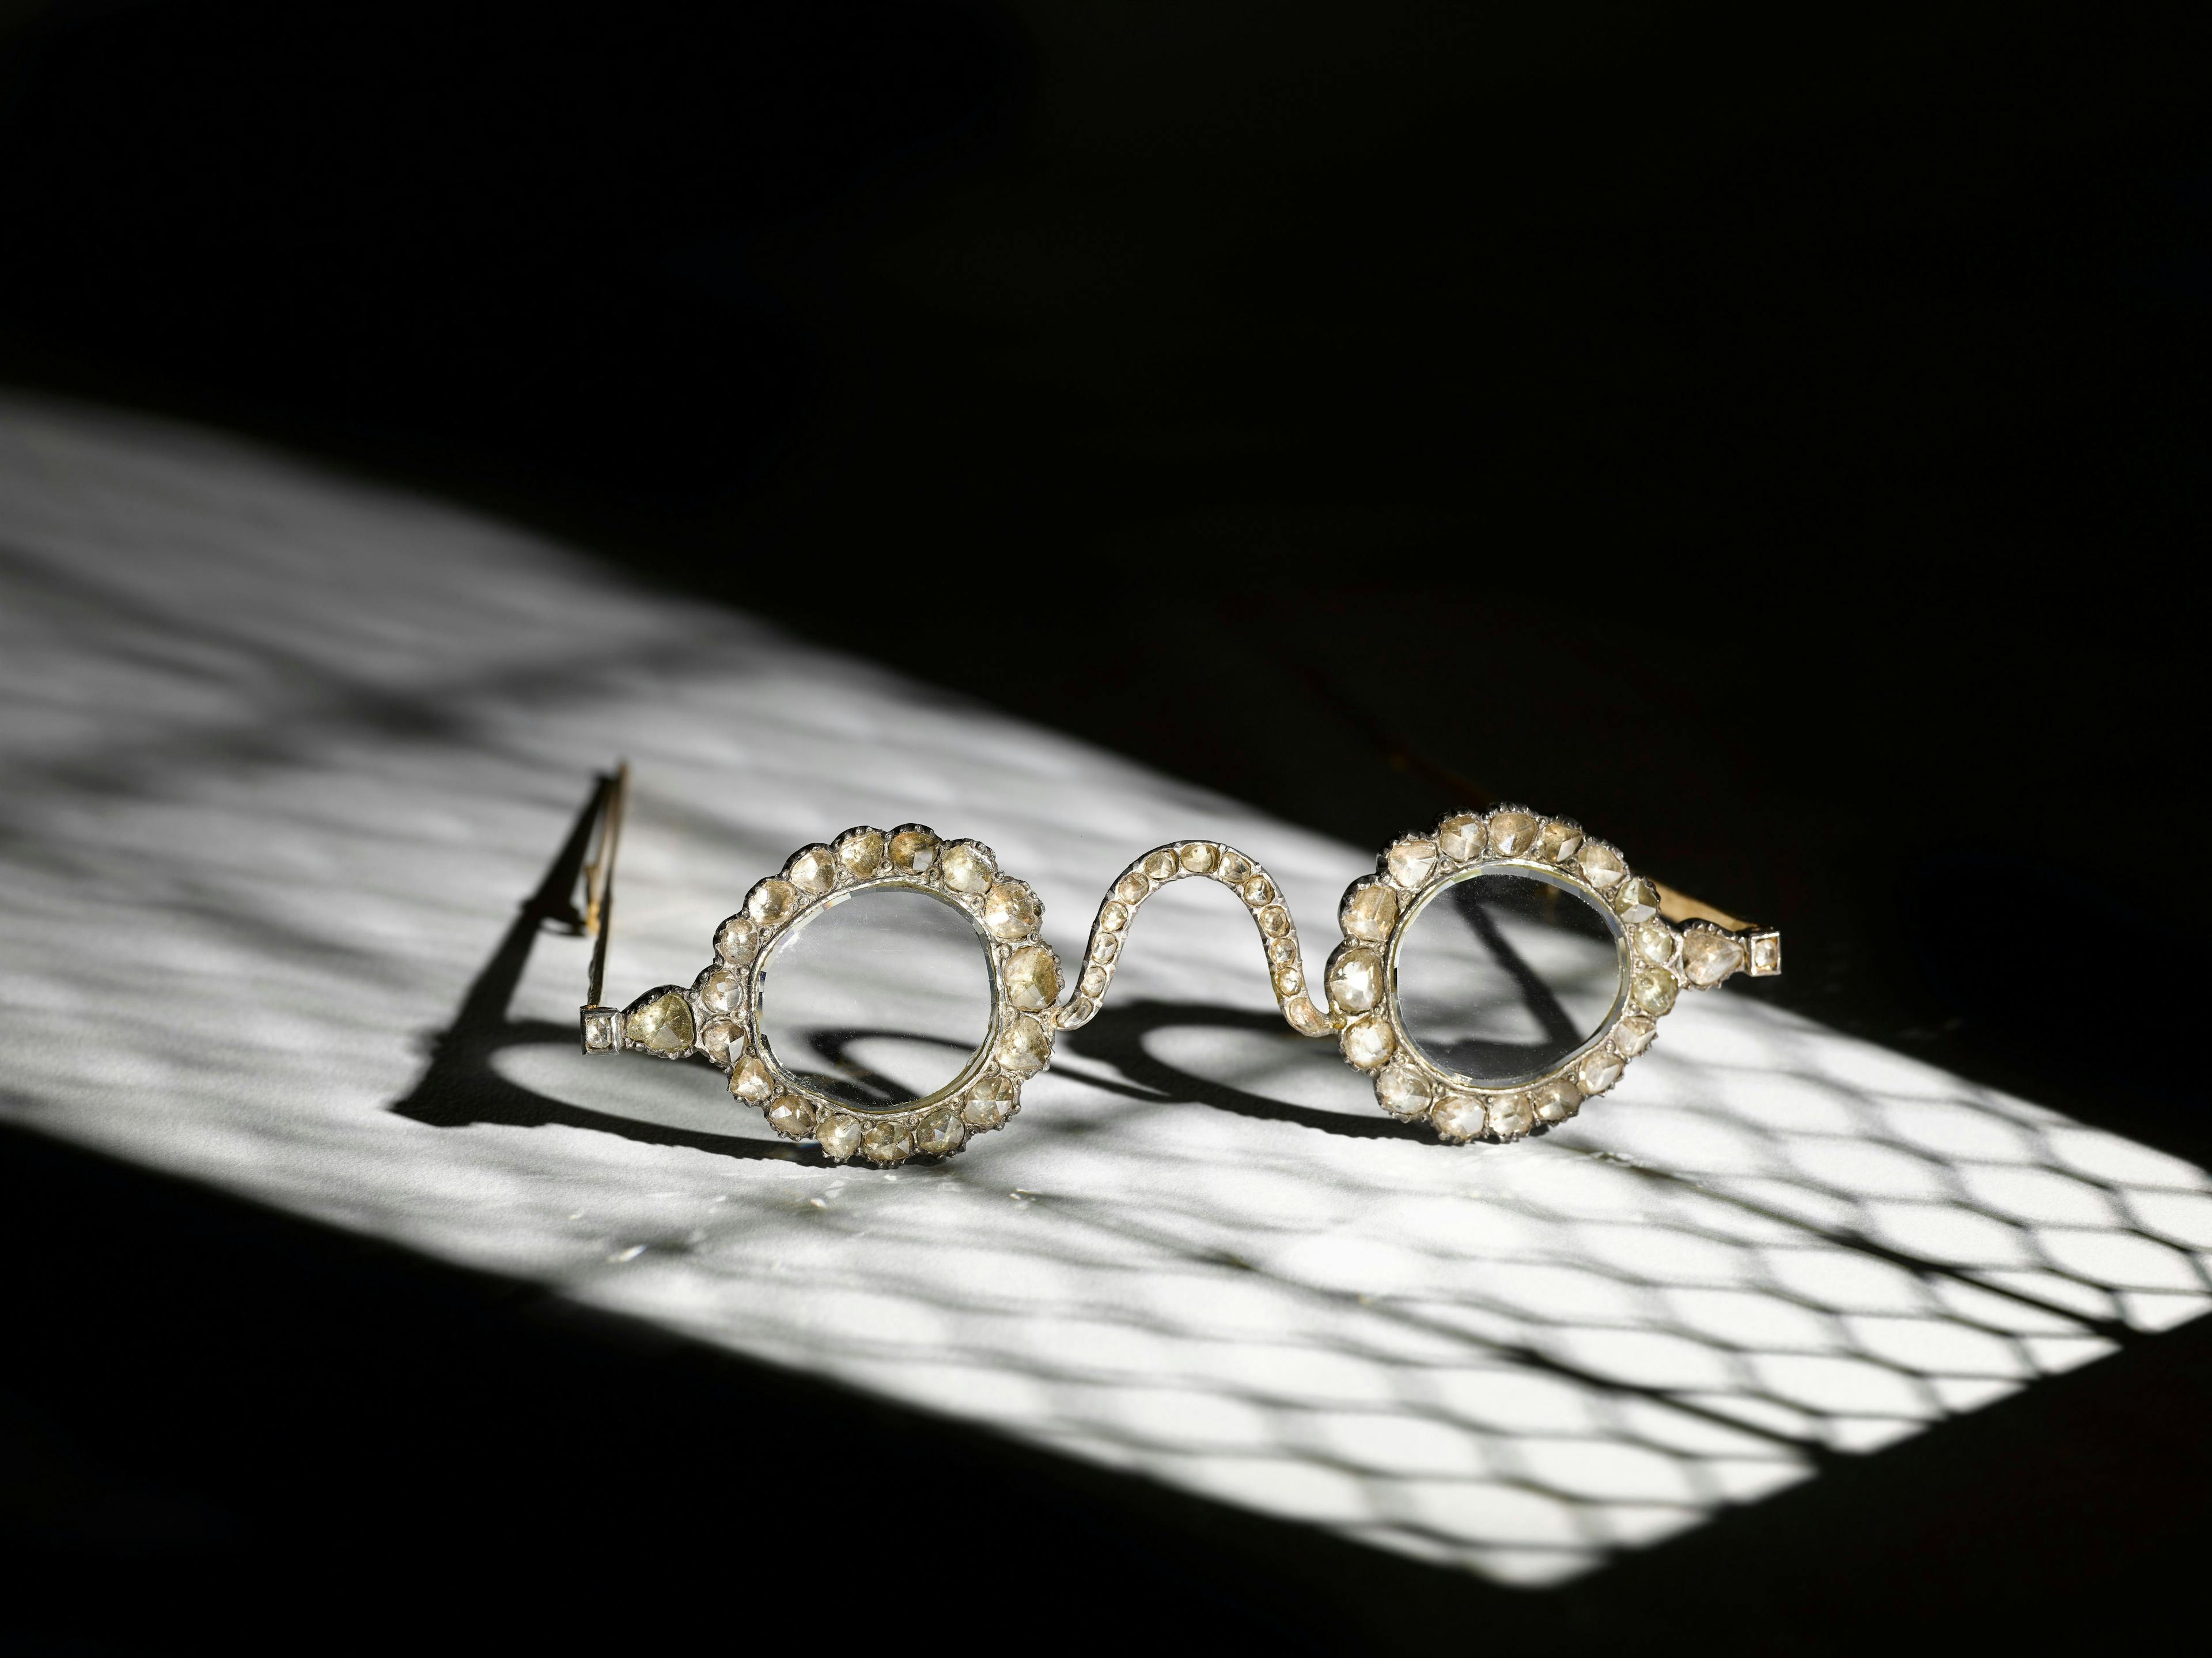 A pair of Mughal spectacles set with diamond lenses, in diamond-mounted frames, India, lenses circa 17th century, frames 19th century (est. 1,500,000 - 2,500,000)